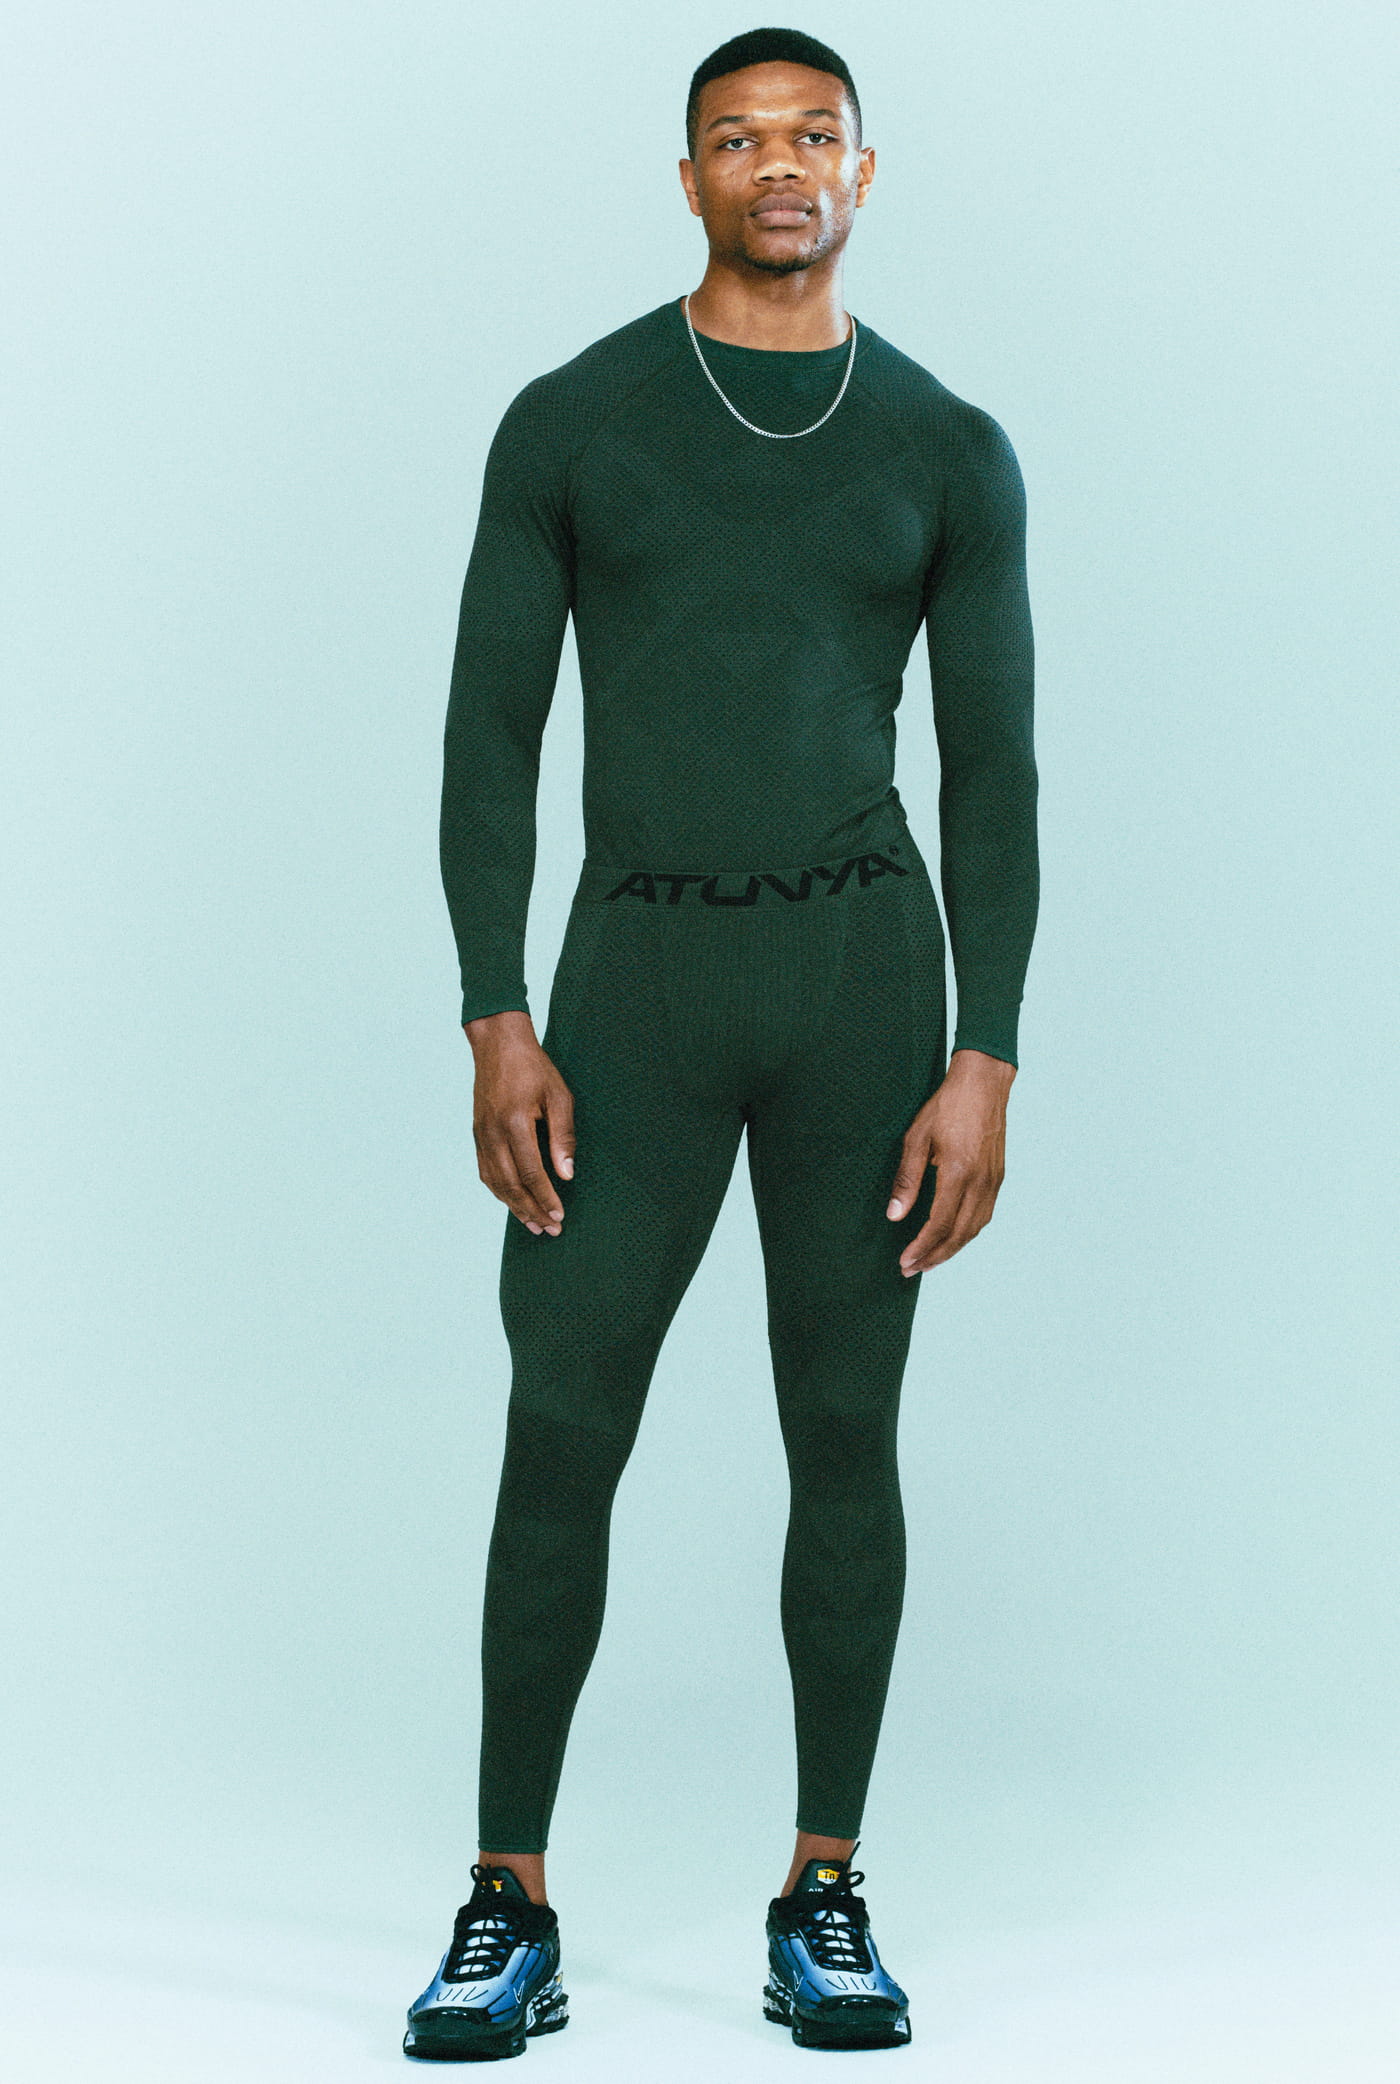 KINETIC Compression Tights